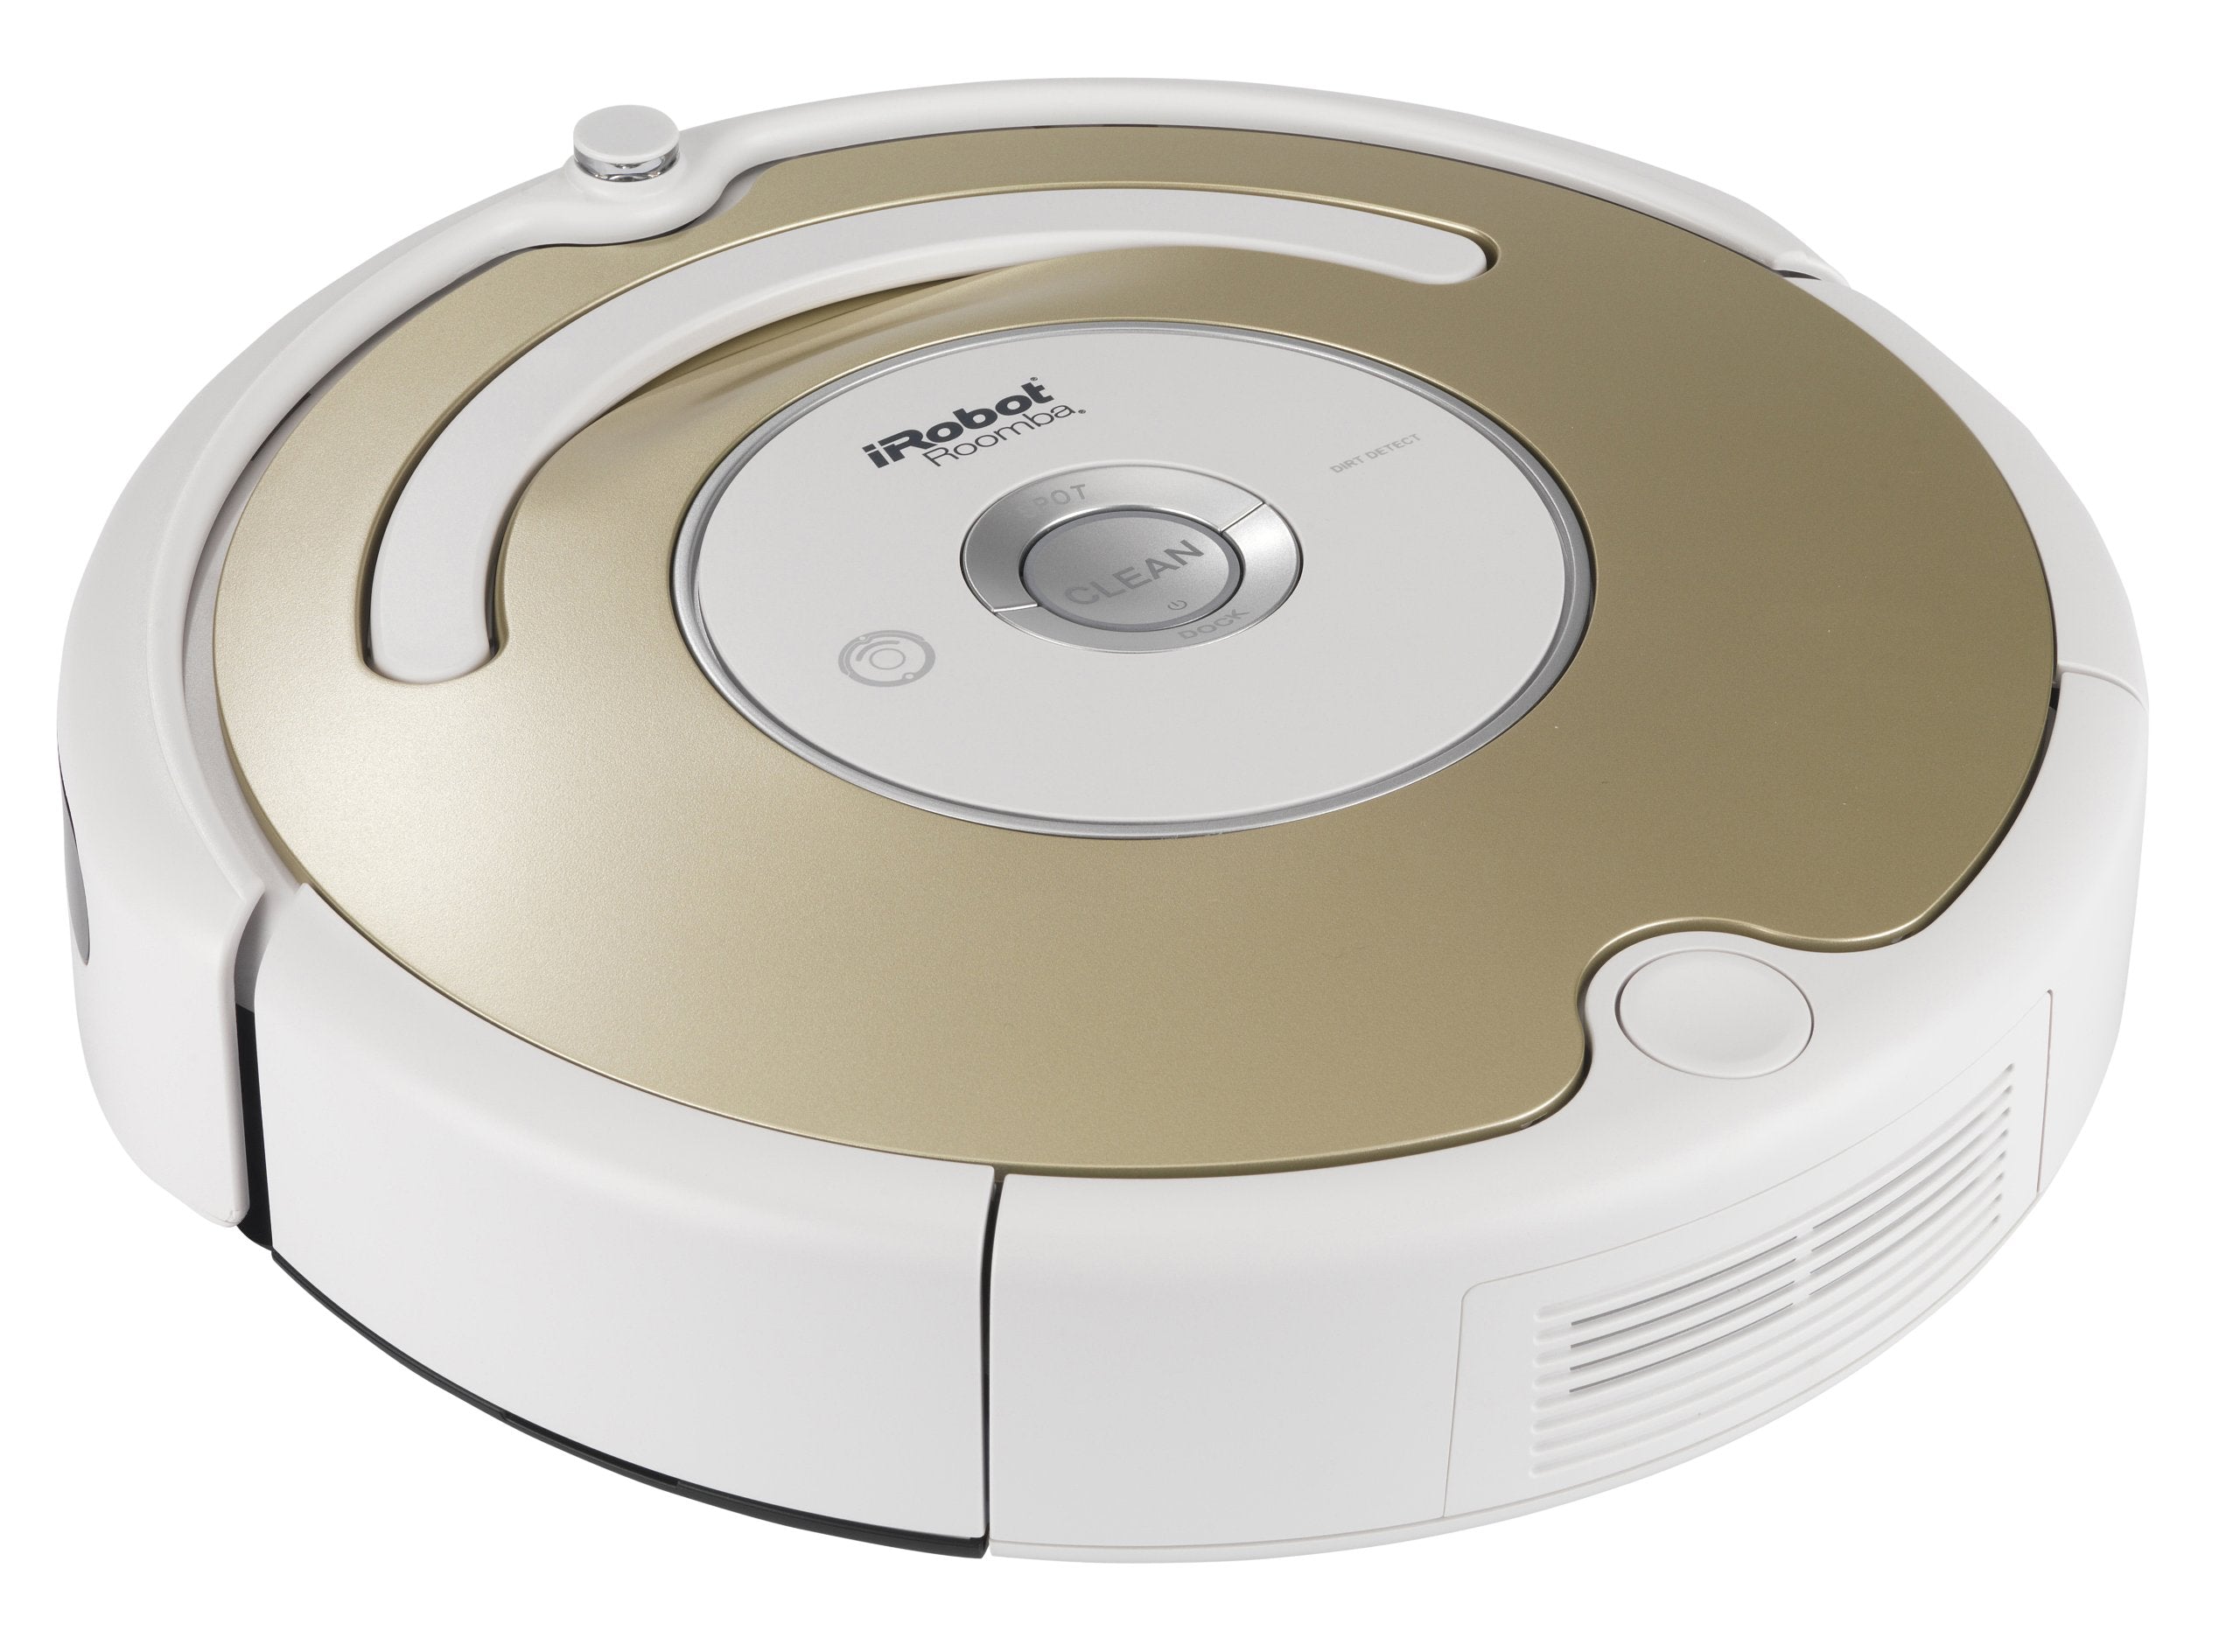 Roomba® 681 productimages